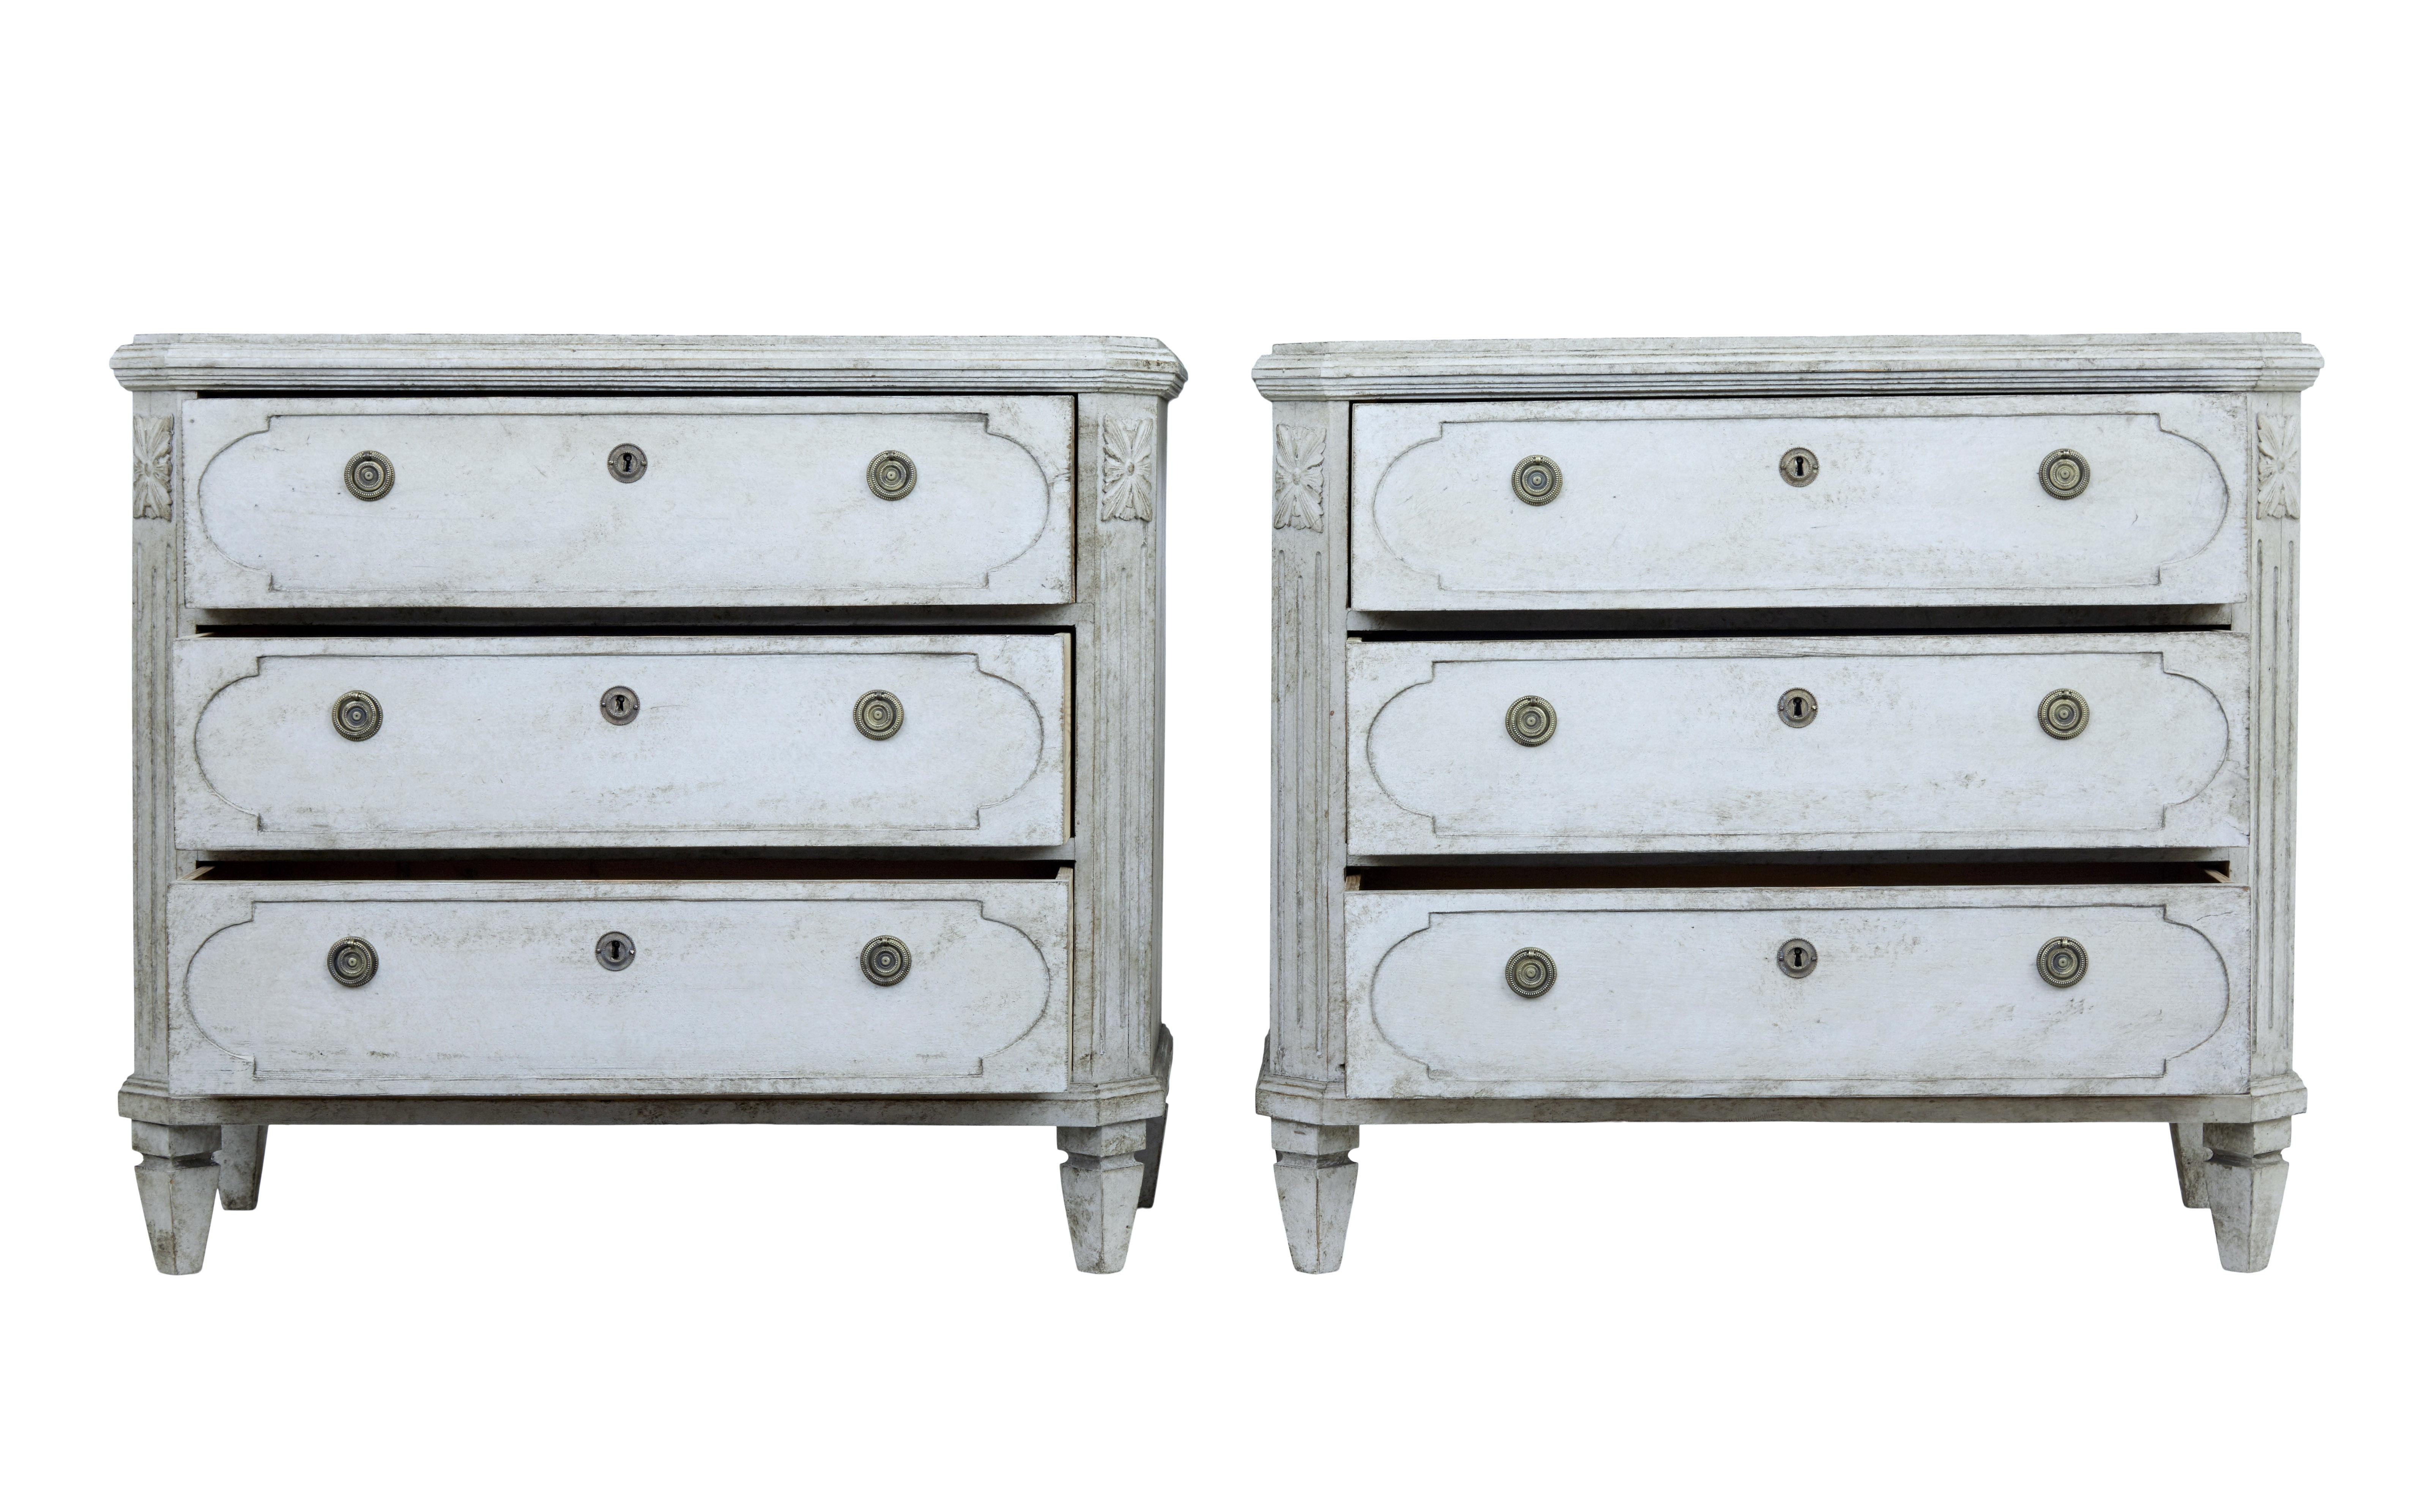 Pair of Gustavian inspired chest of drawers, circa 1870.

3 drawer chests with shaped fronts, later ring handles and escutheons. Canted corners with applied acanthus detailing.

Working locks and key. Standing on short tapered feet.

Later